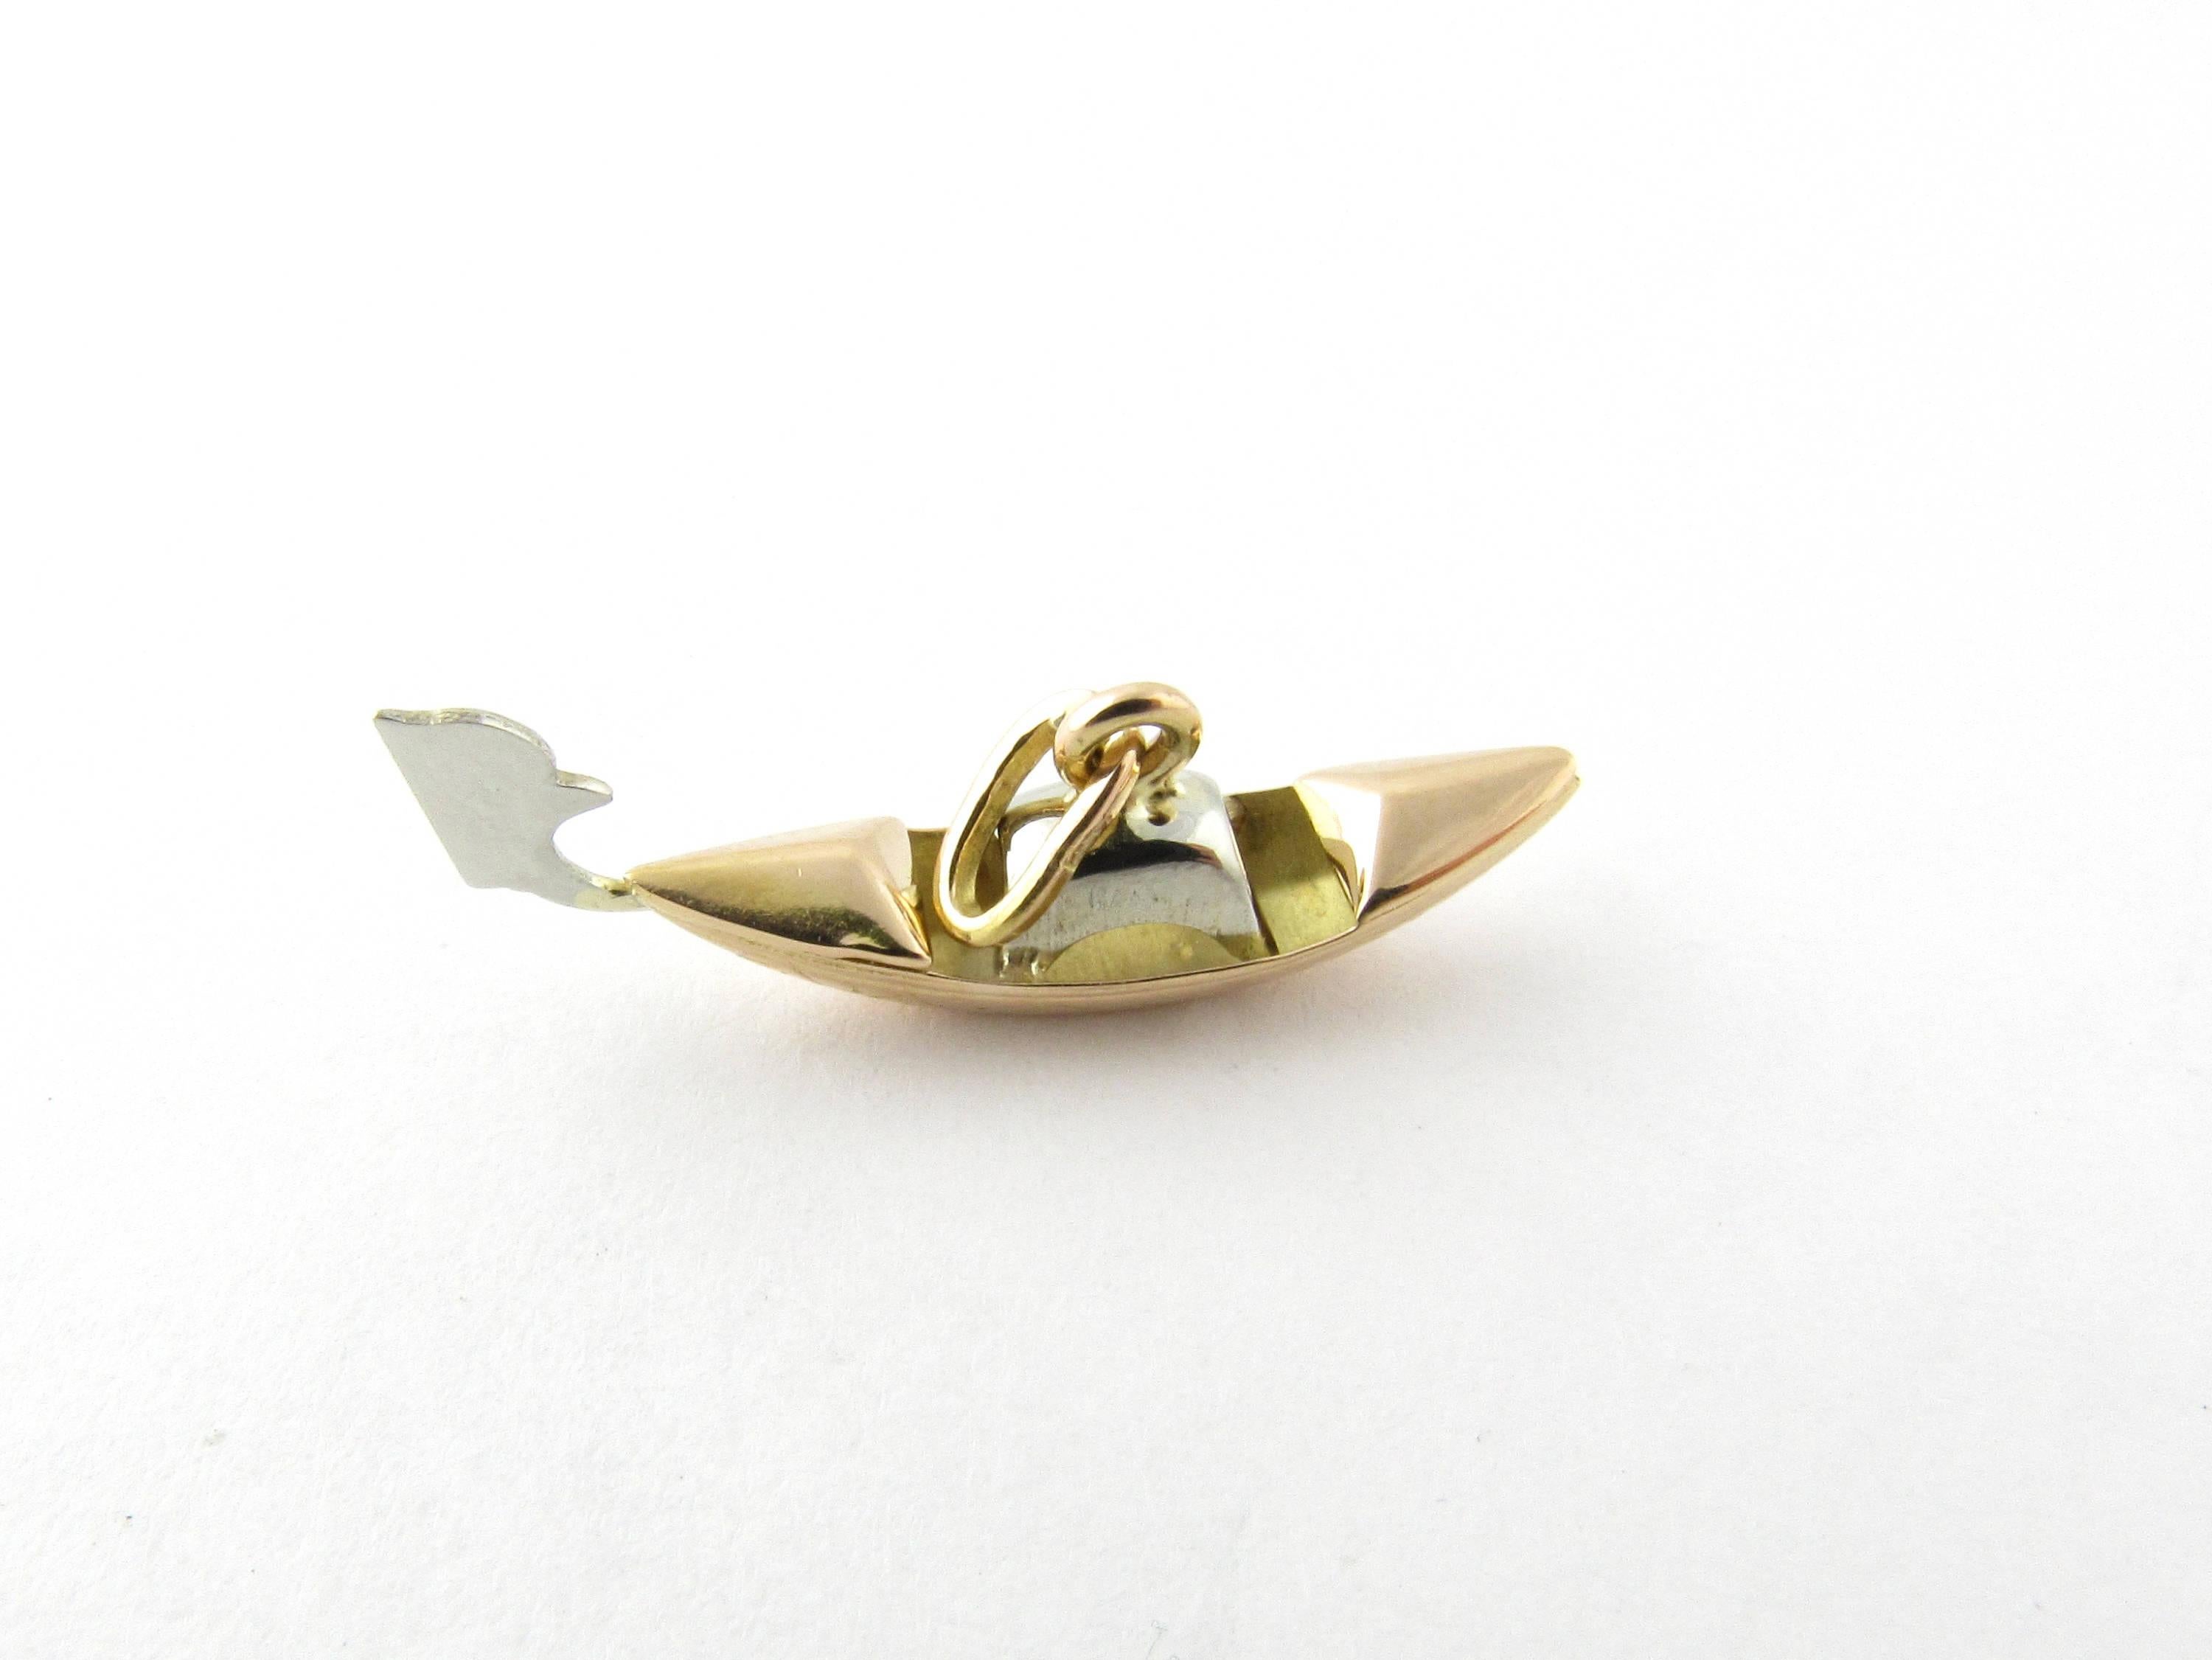 Vintage 14 Karat Yellow Gold Gondola Charm-

Bring back those romantic Venice gondola rides!

This lovely 3D charm features a miniature gondola exquisitely detailed in 14K yellow gold.

Hallmark: Acid tested for 14K gold.

Very good condition,